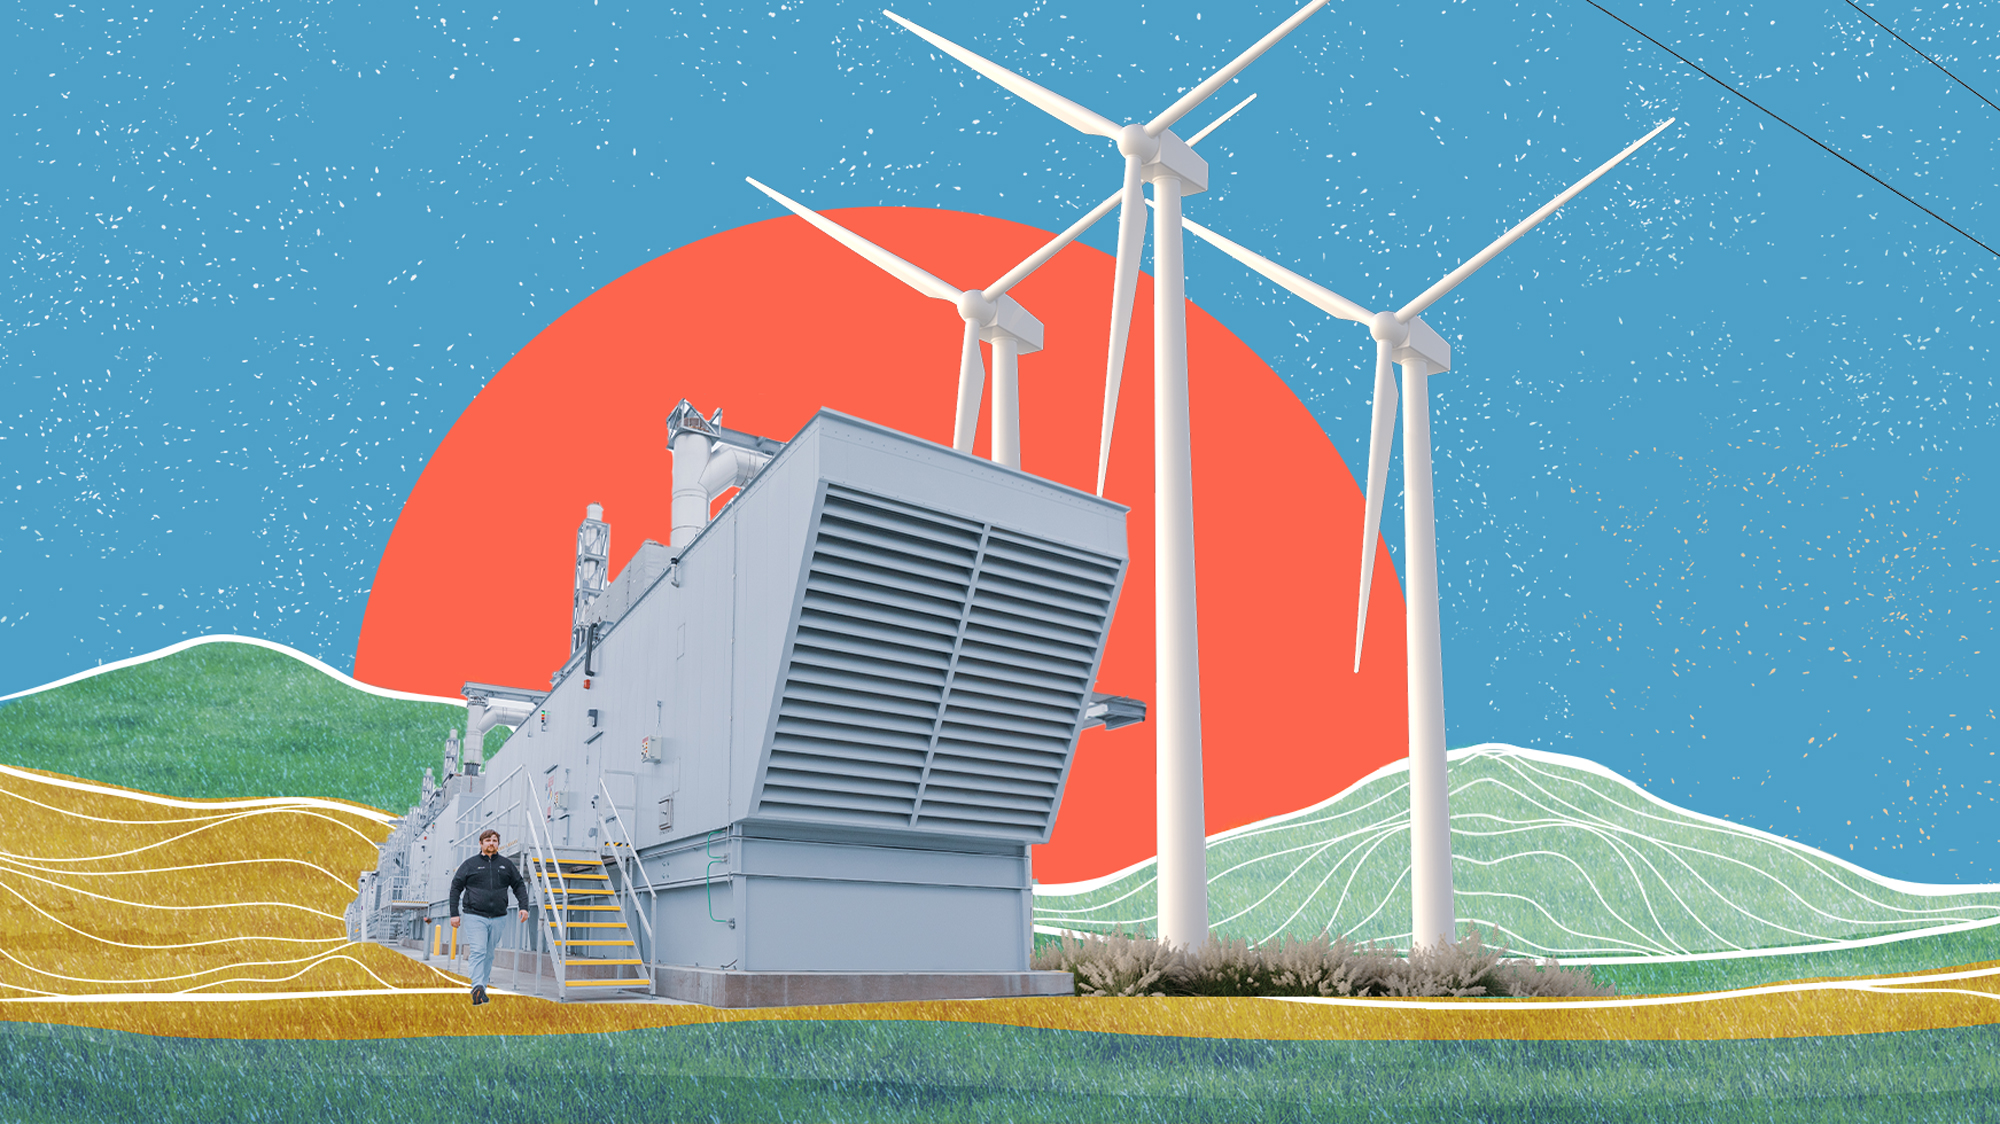 essens øjenbryn heltinde As the world goes digital, datacenters that make the cloud work look to renewable  energy sources - Microsoft News Centre Europe